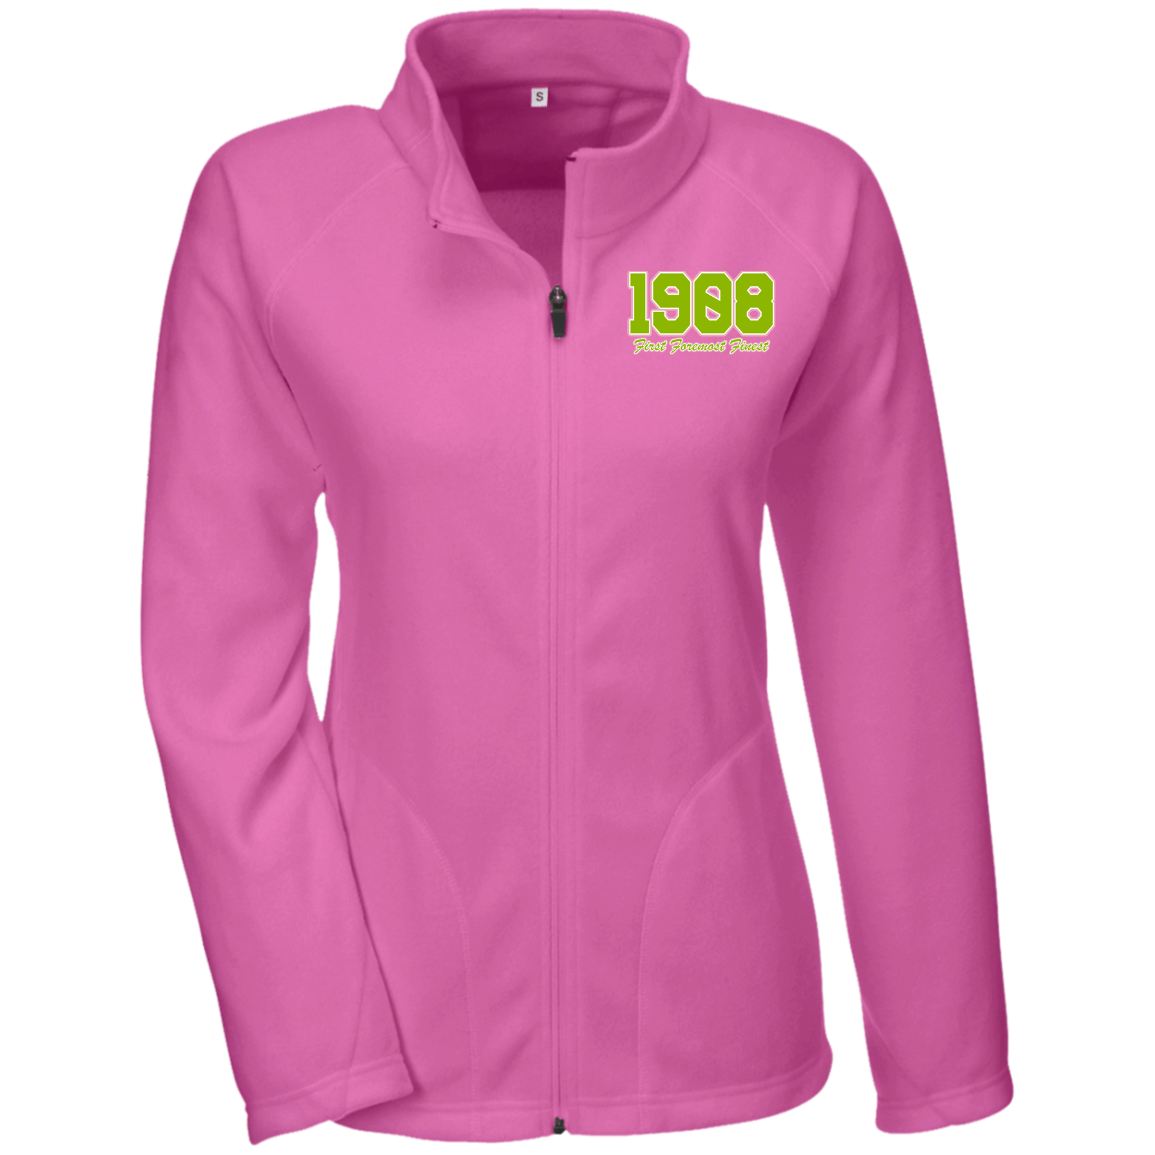 First Foremost Finest Ladies' Microfleece